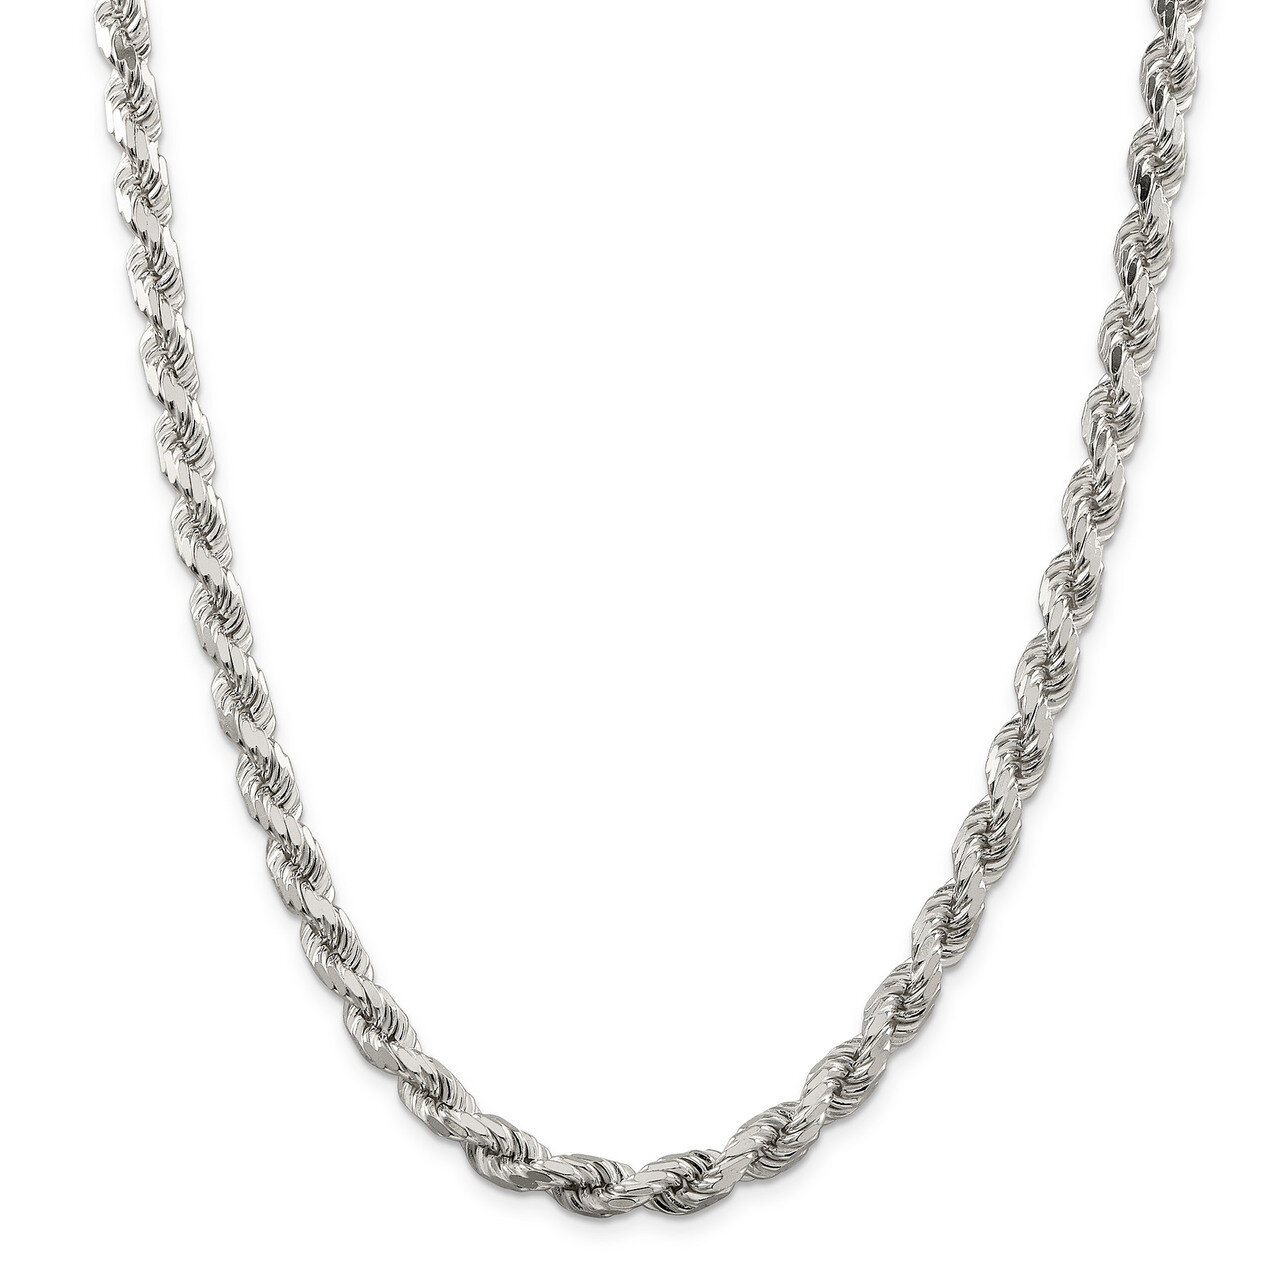 28 Inch 7mm Diamond-cut Polished 8 Sides Rope Chain Sterling Silver QDC140-28